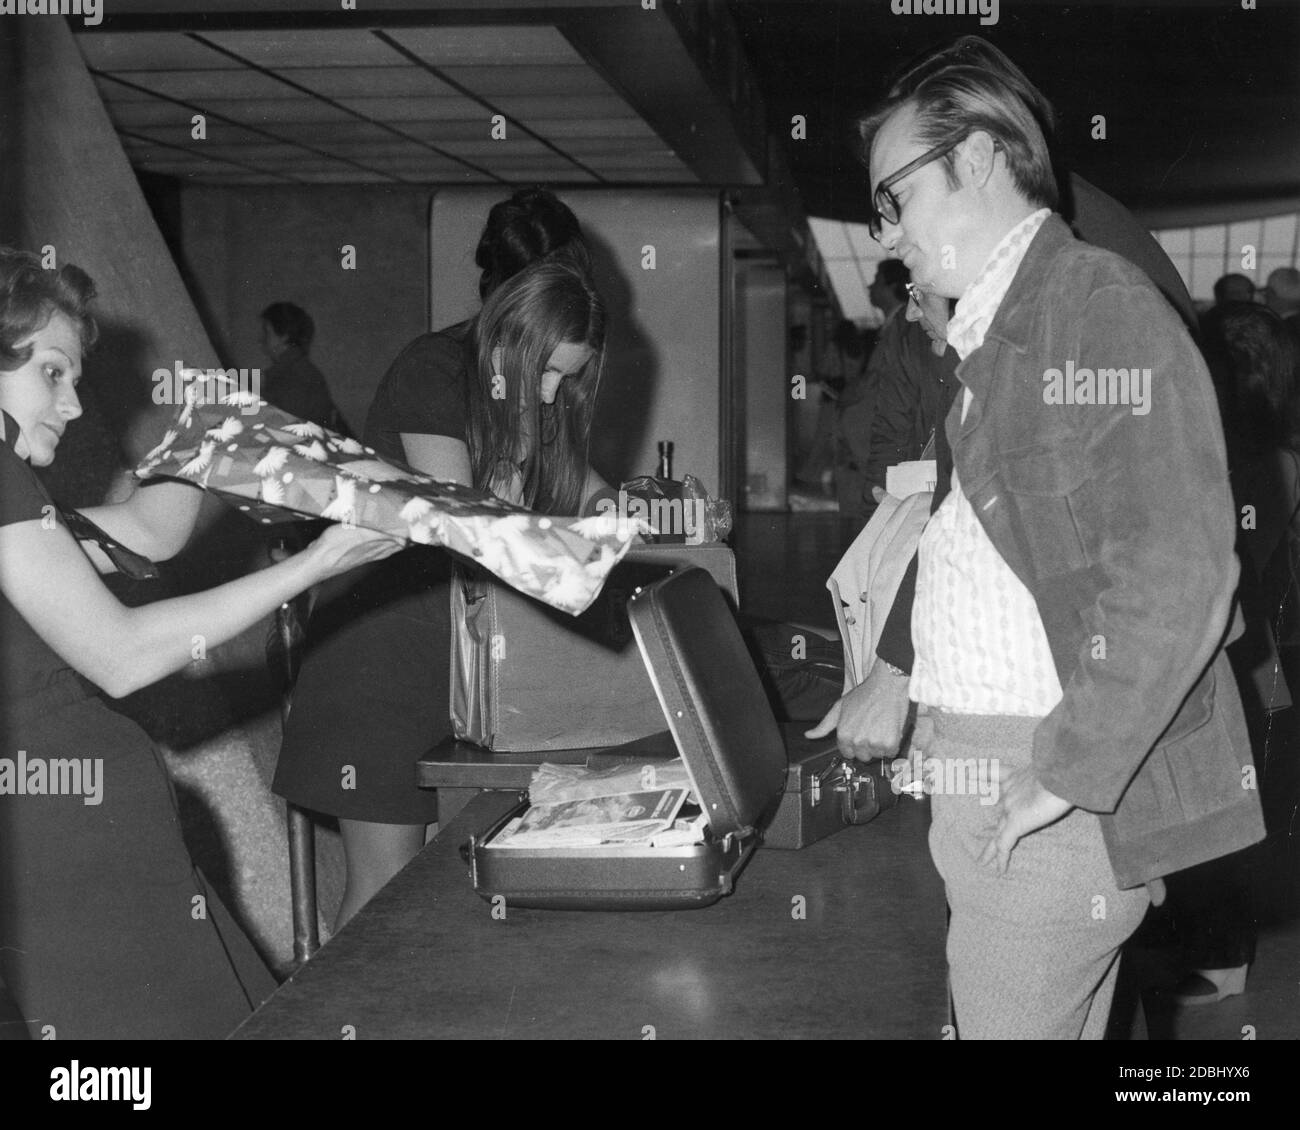 A traveler at Washington Dulles Airport looks on while airline personnel check his luggage and a Christmas gift for weapons and explosives, Chantilly, VA, circa 1975.  (Photo by Federal Aviation Administration/RBM Vintage Images) Stock Photo